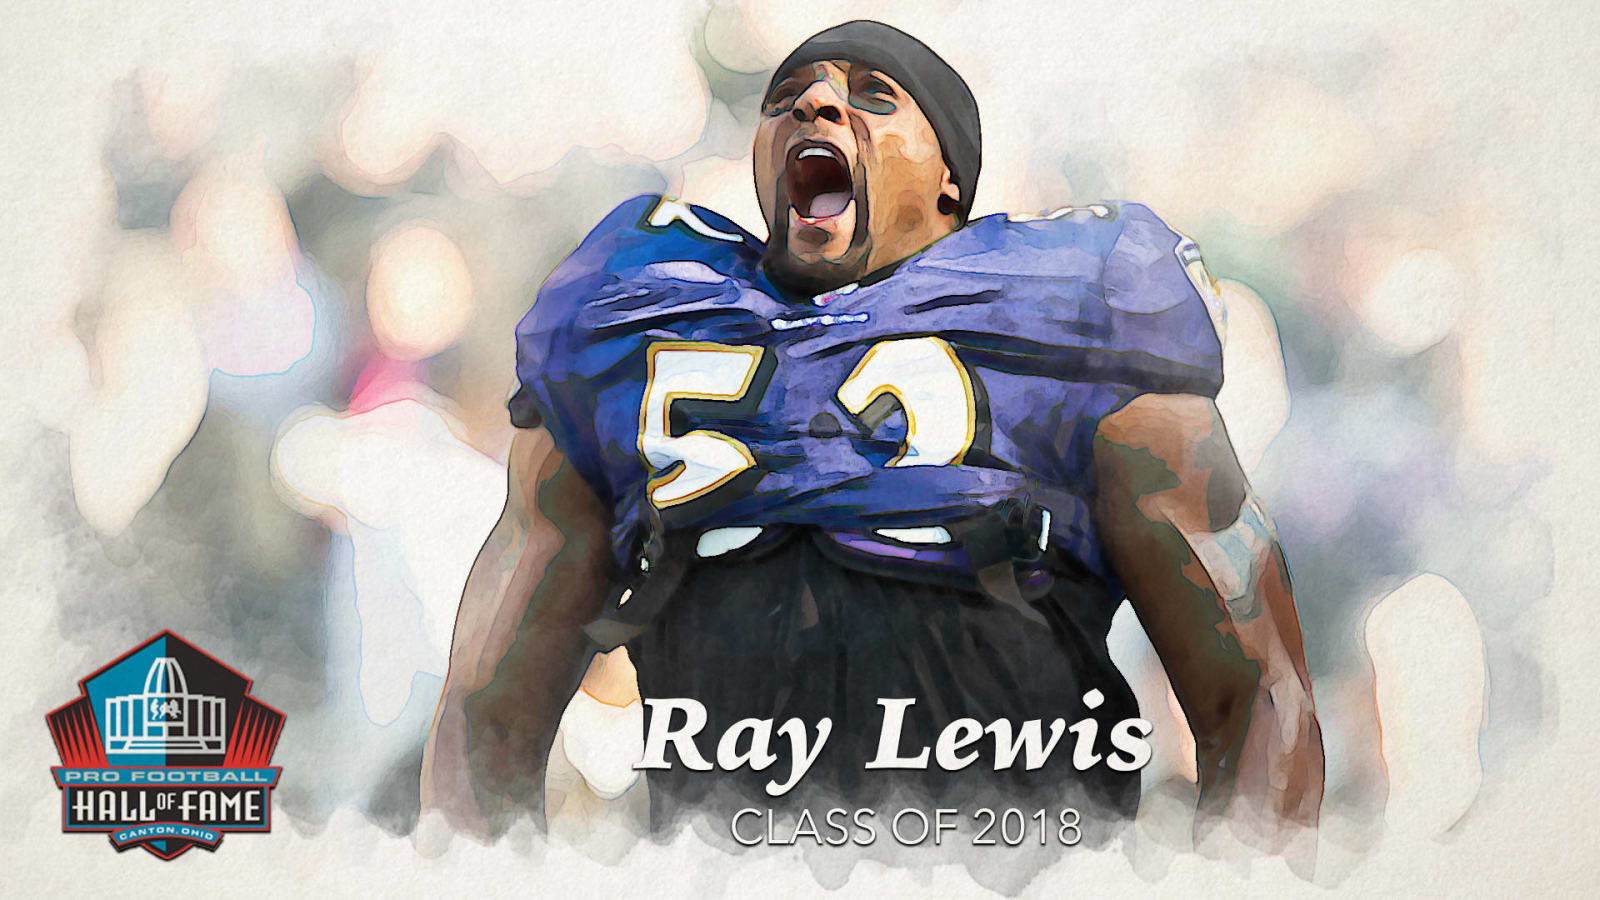 Ray Lewis was a Hall of Famer on the field but had many questions away from it